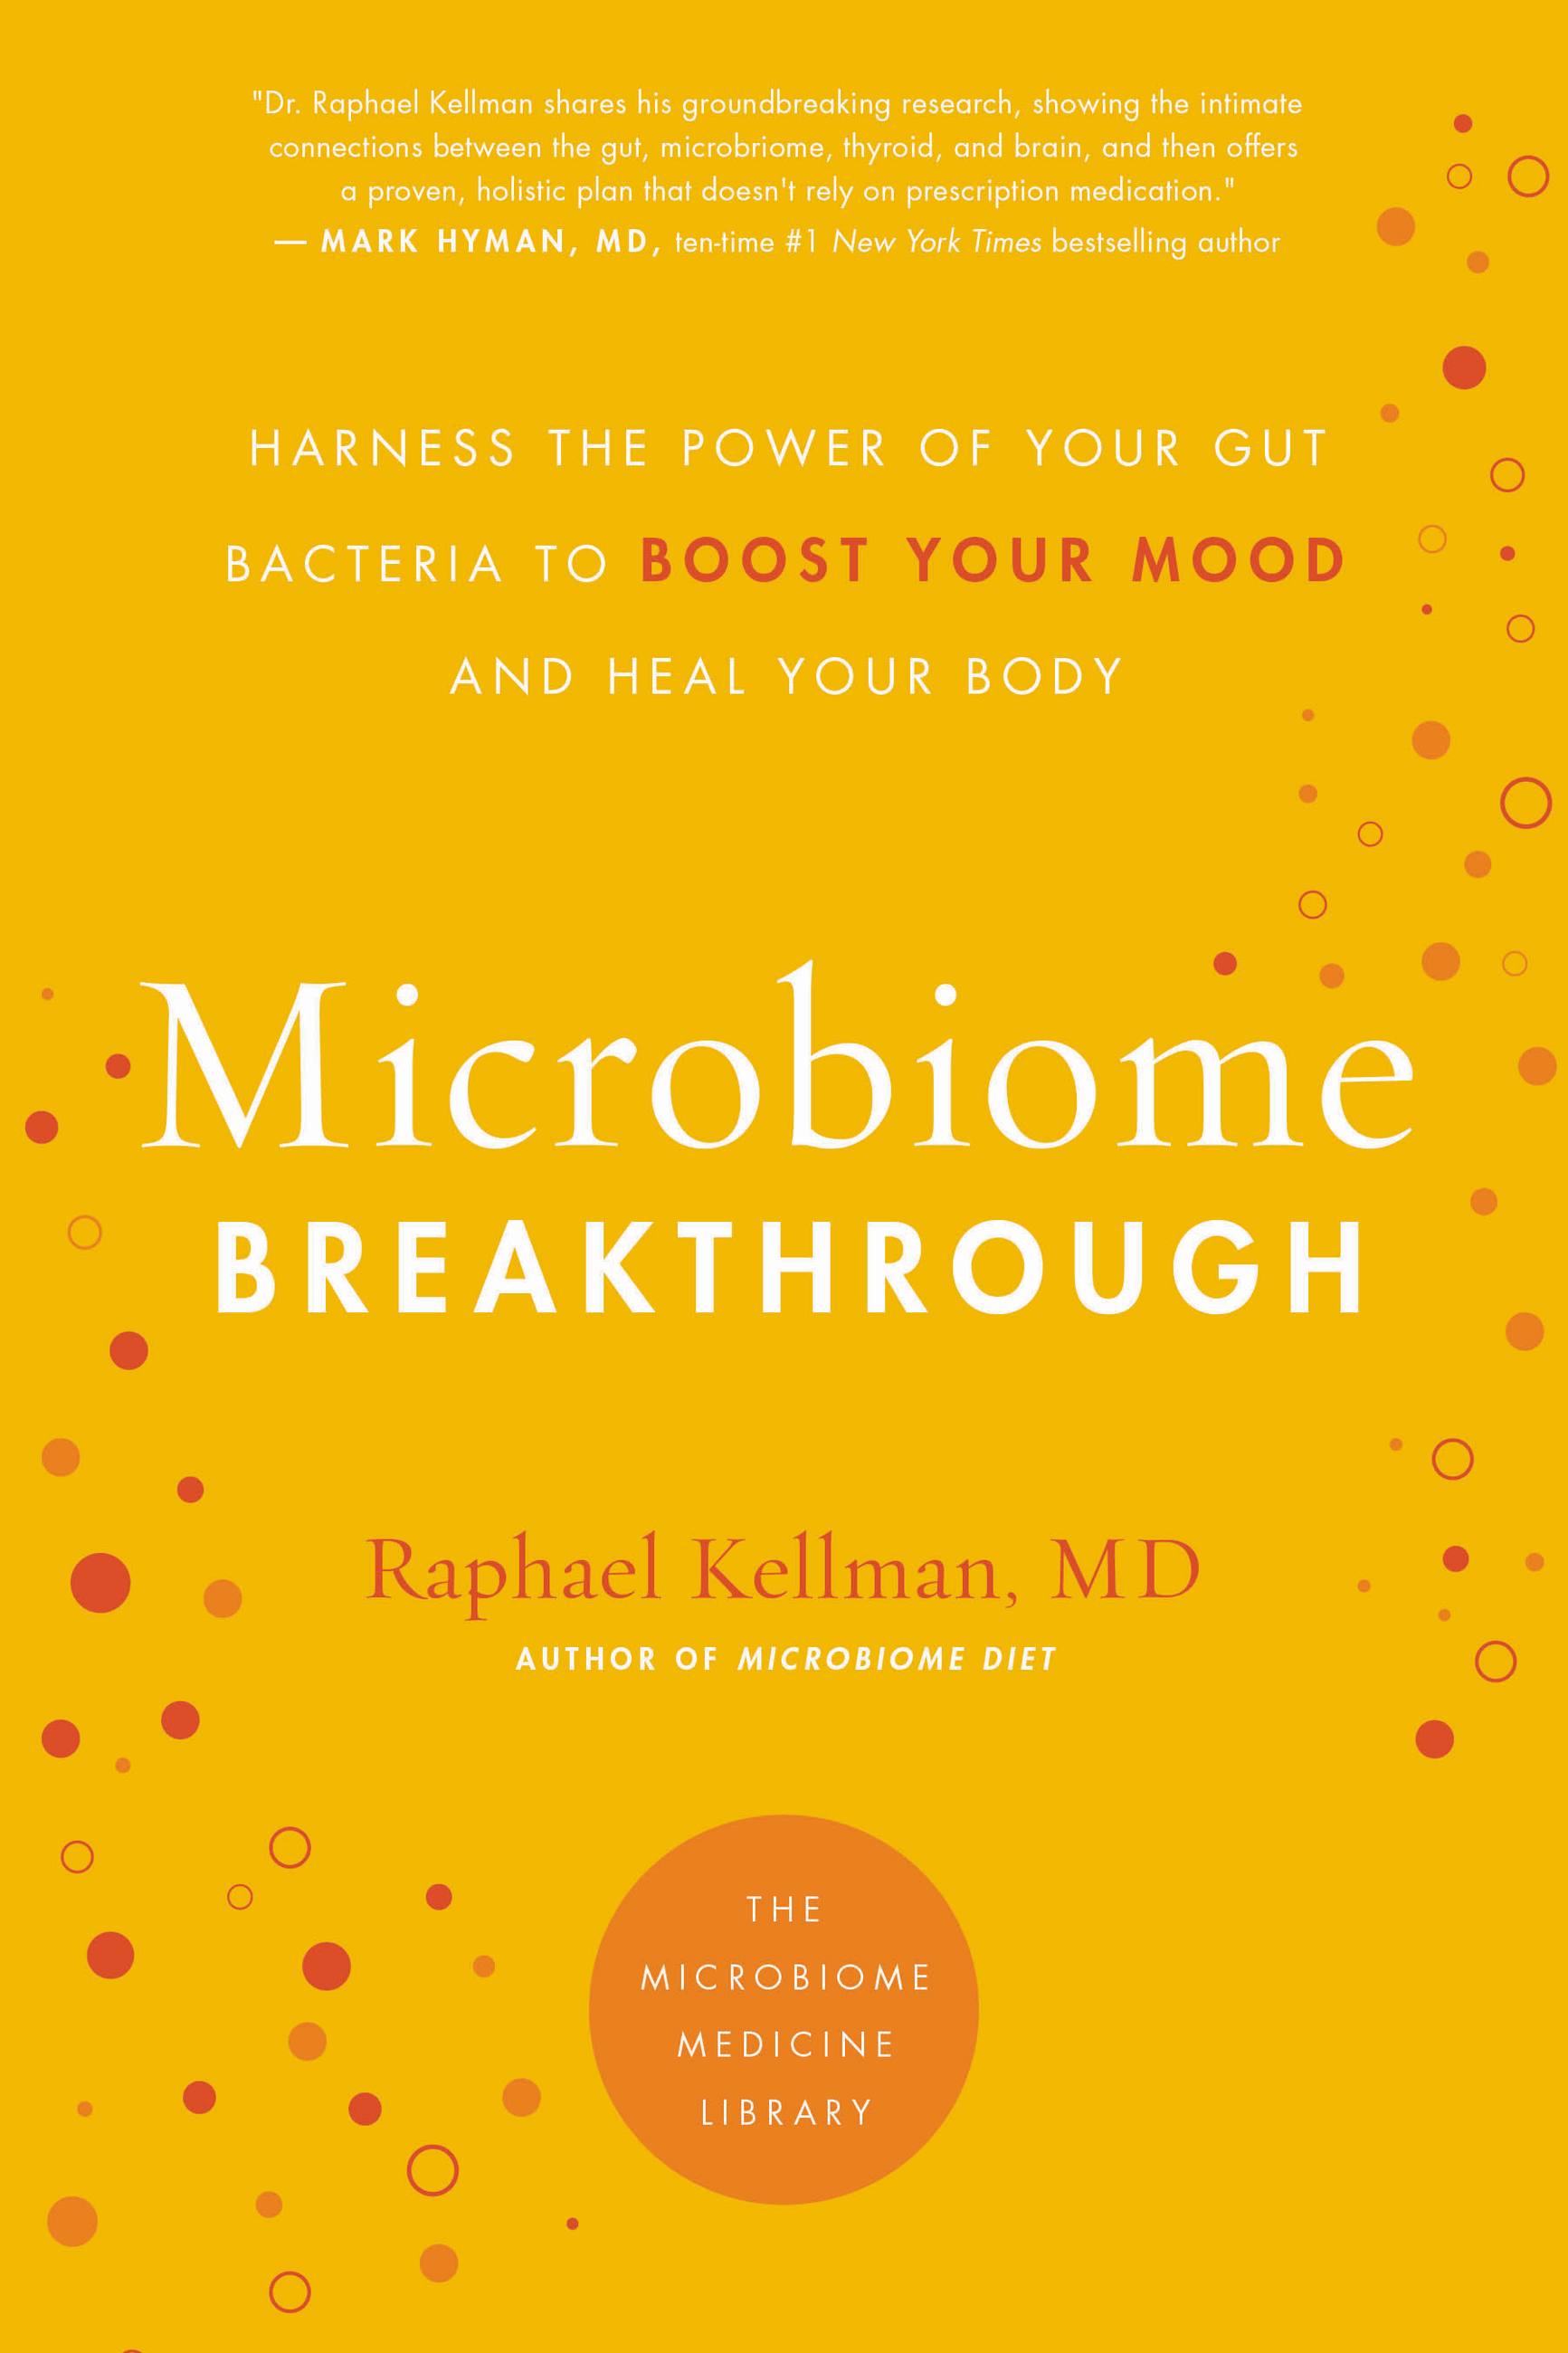 Book　Hachette　Kellman,　MD　Breakthrough　Raphael　by　Microbiome　Group